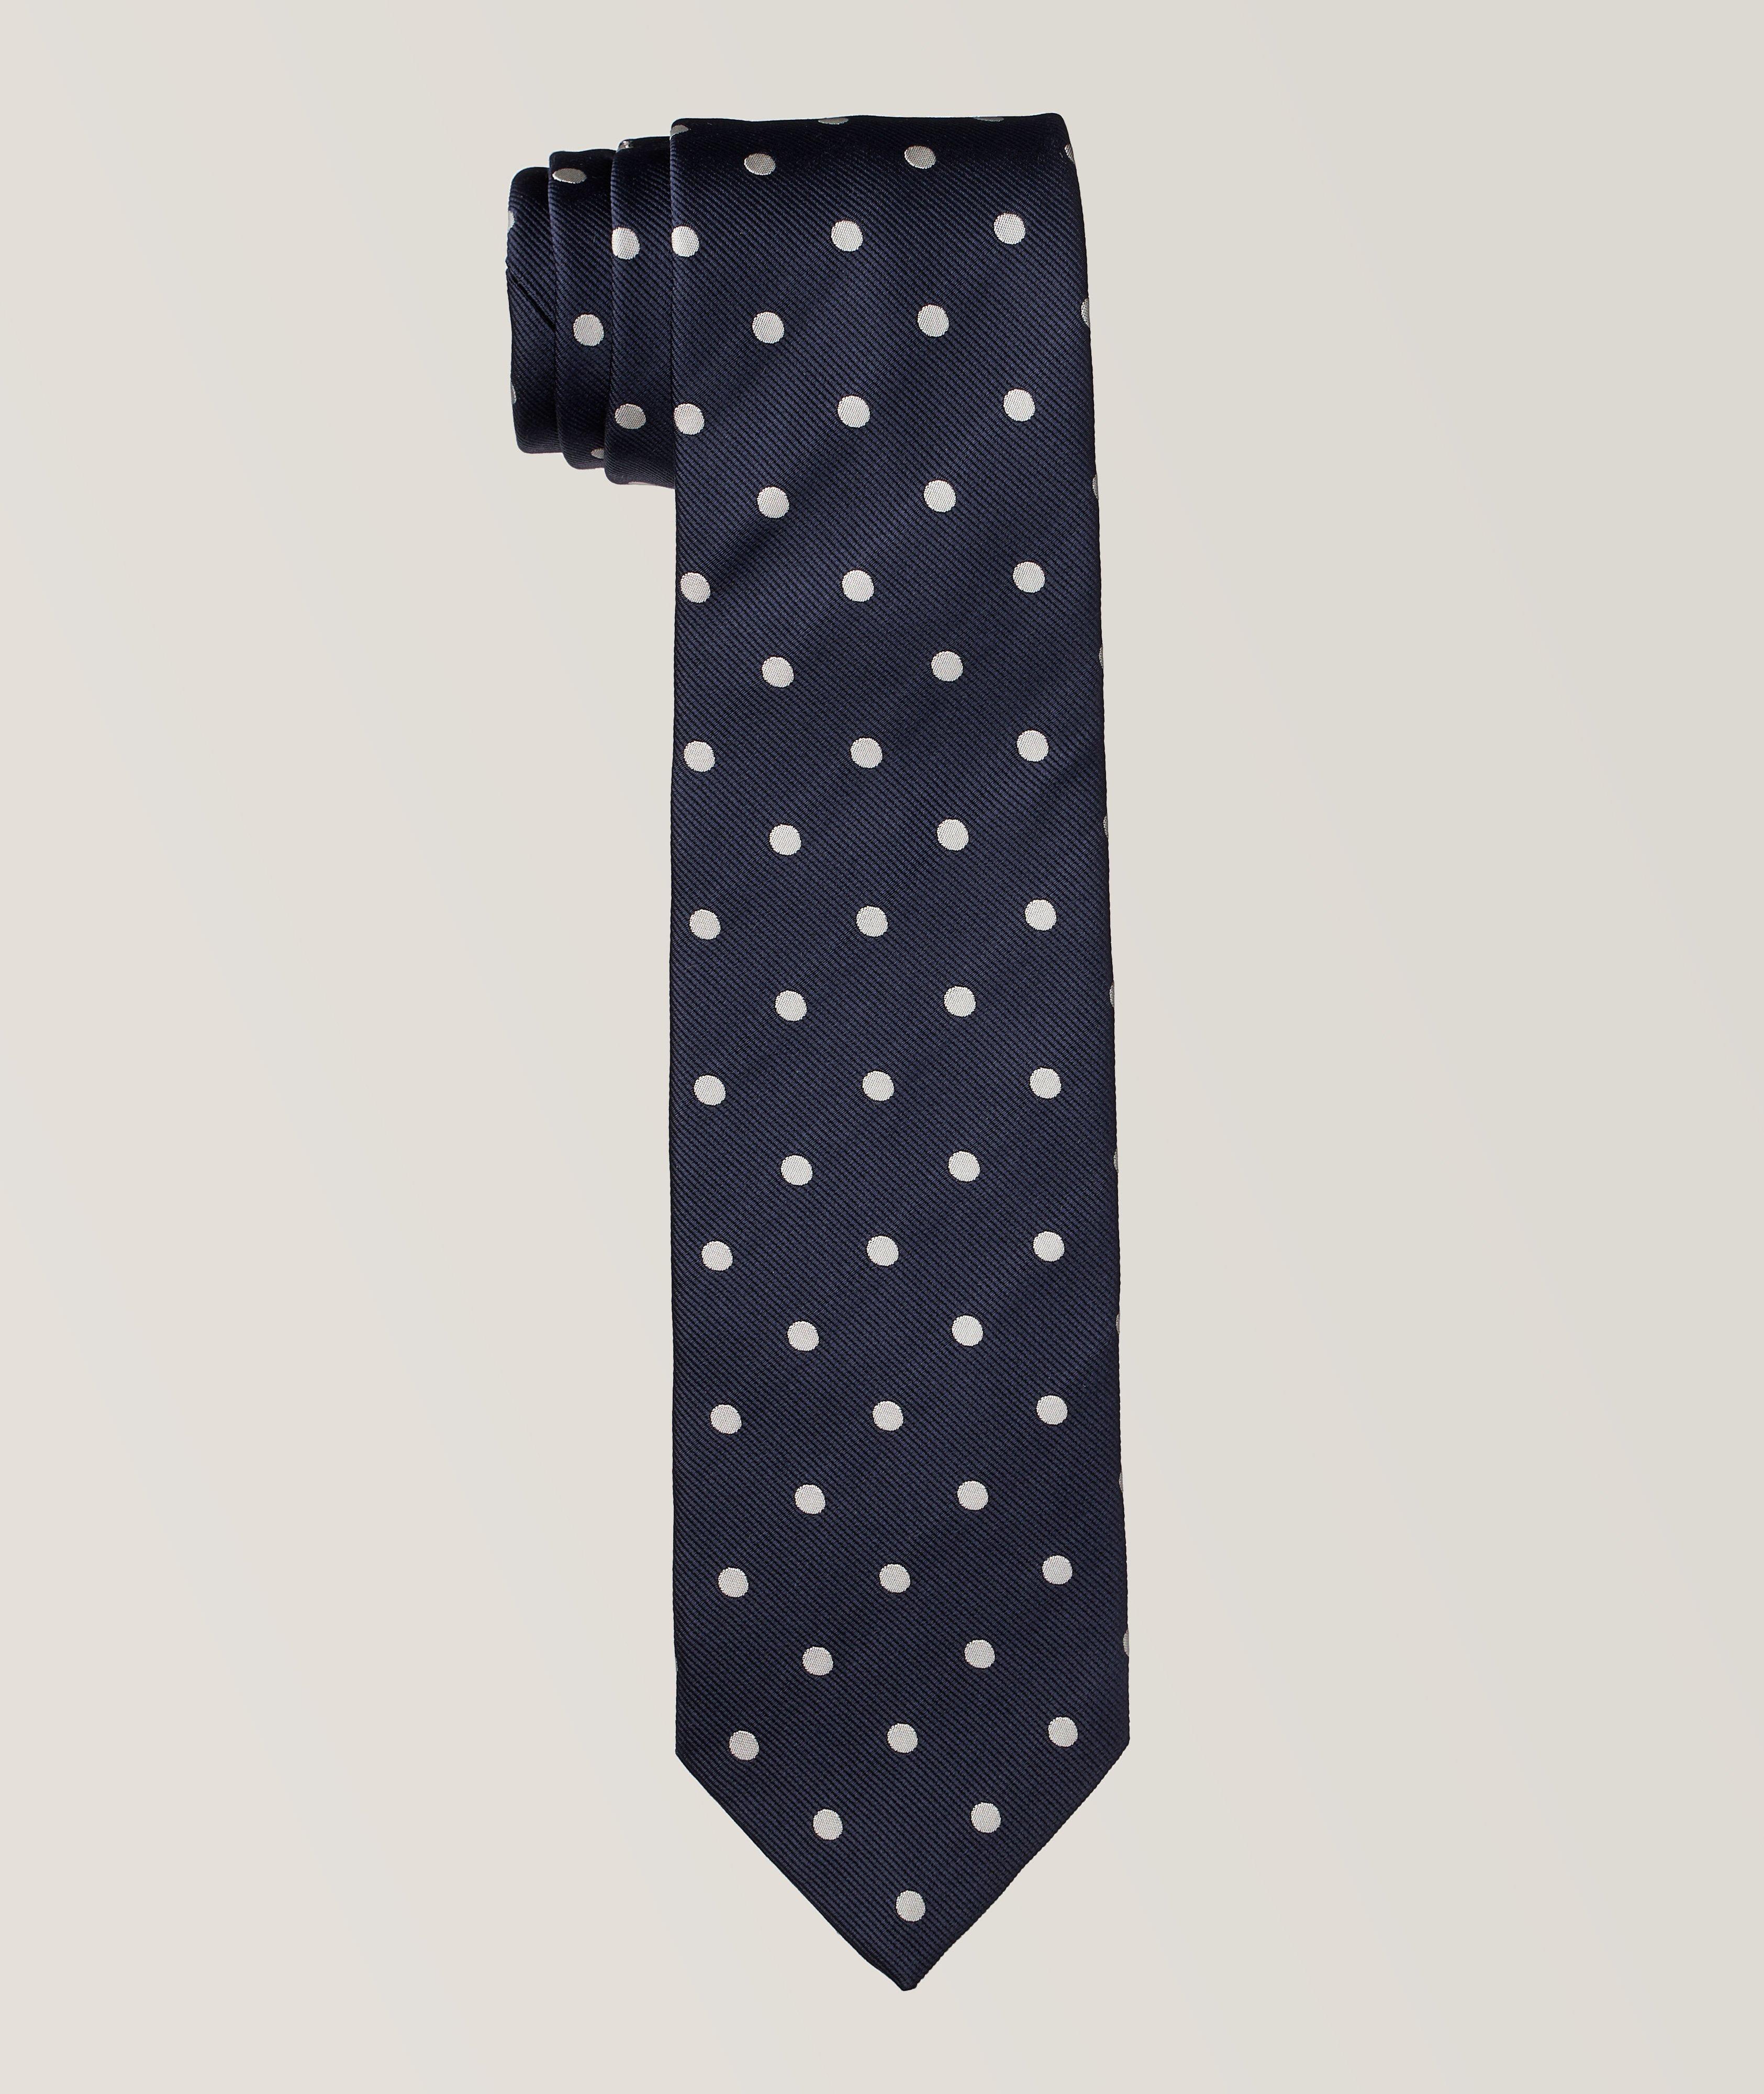 Embroidered Polka Dot Pattern Silk Tie image 0